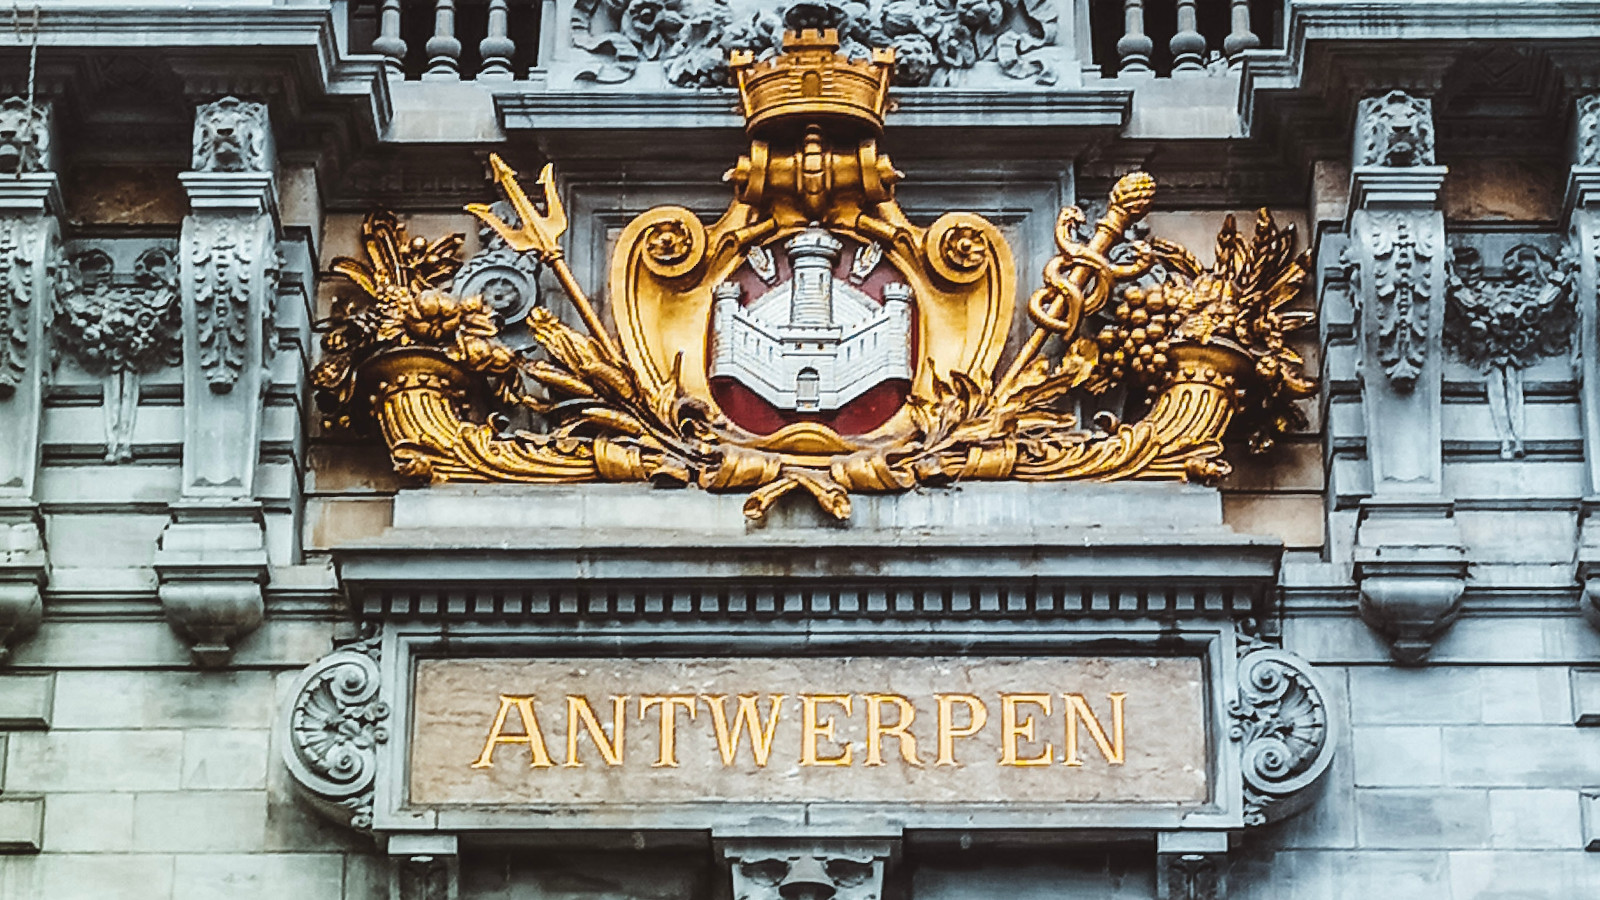 Antwerp's digital partner hacked, ransomware hits municipal services